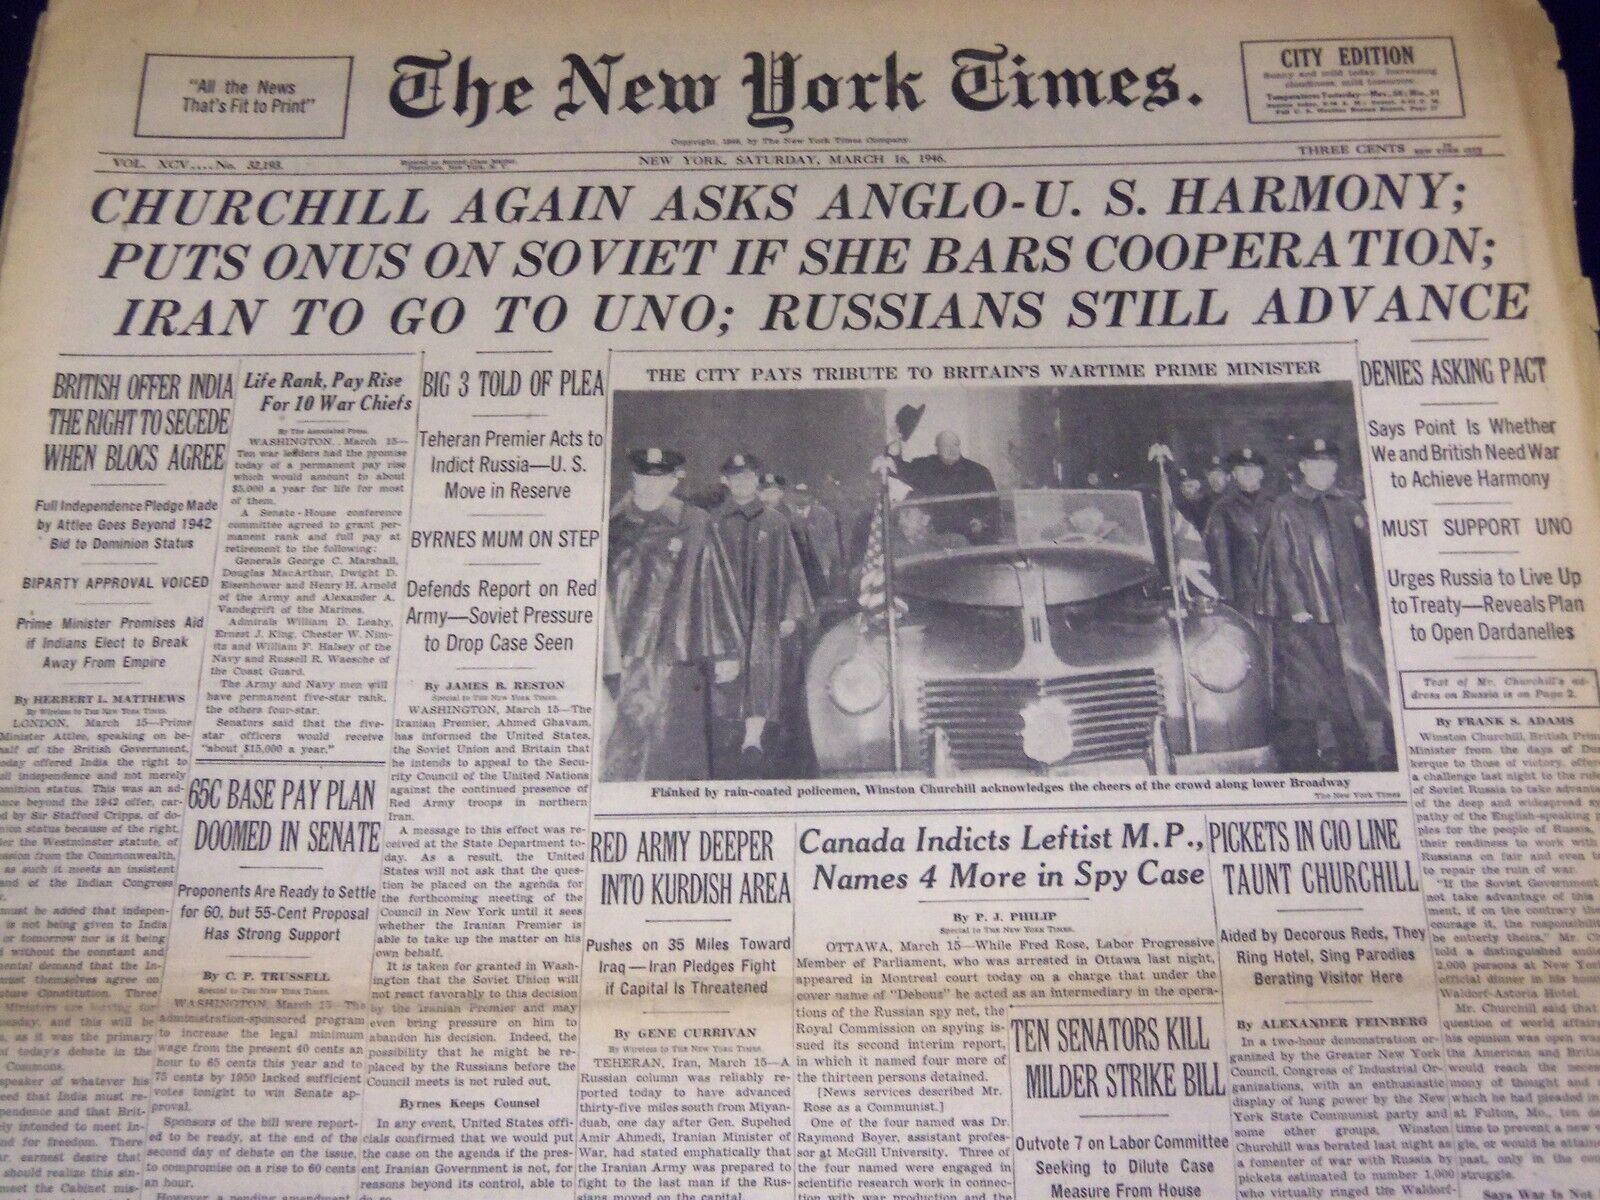 1946 MARCH 16 NEW YORK TIMES - CHURCHILL AGAIN ASKS ANGLO U. S. HARMONY - NT 868